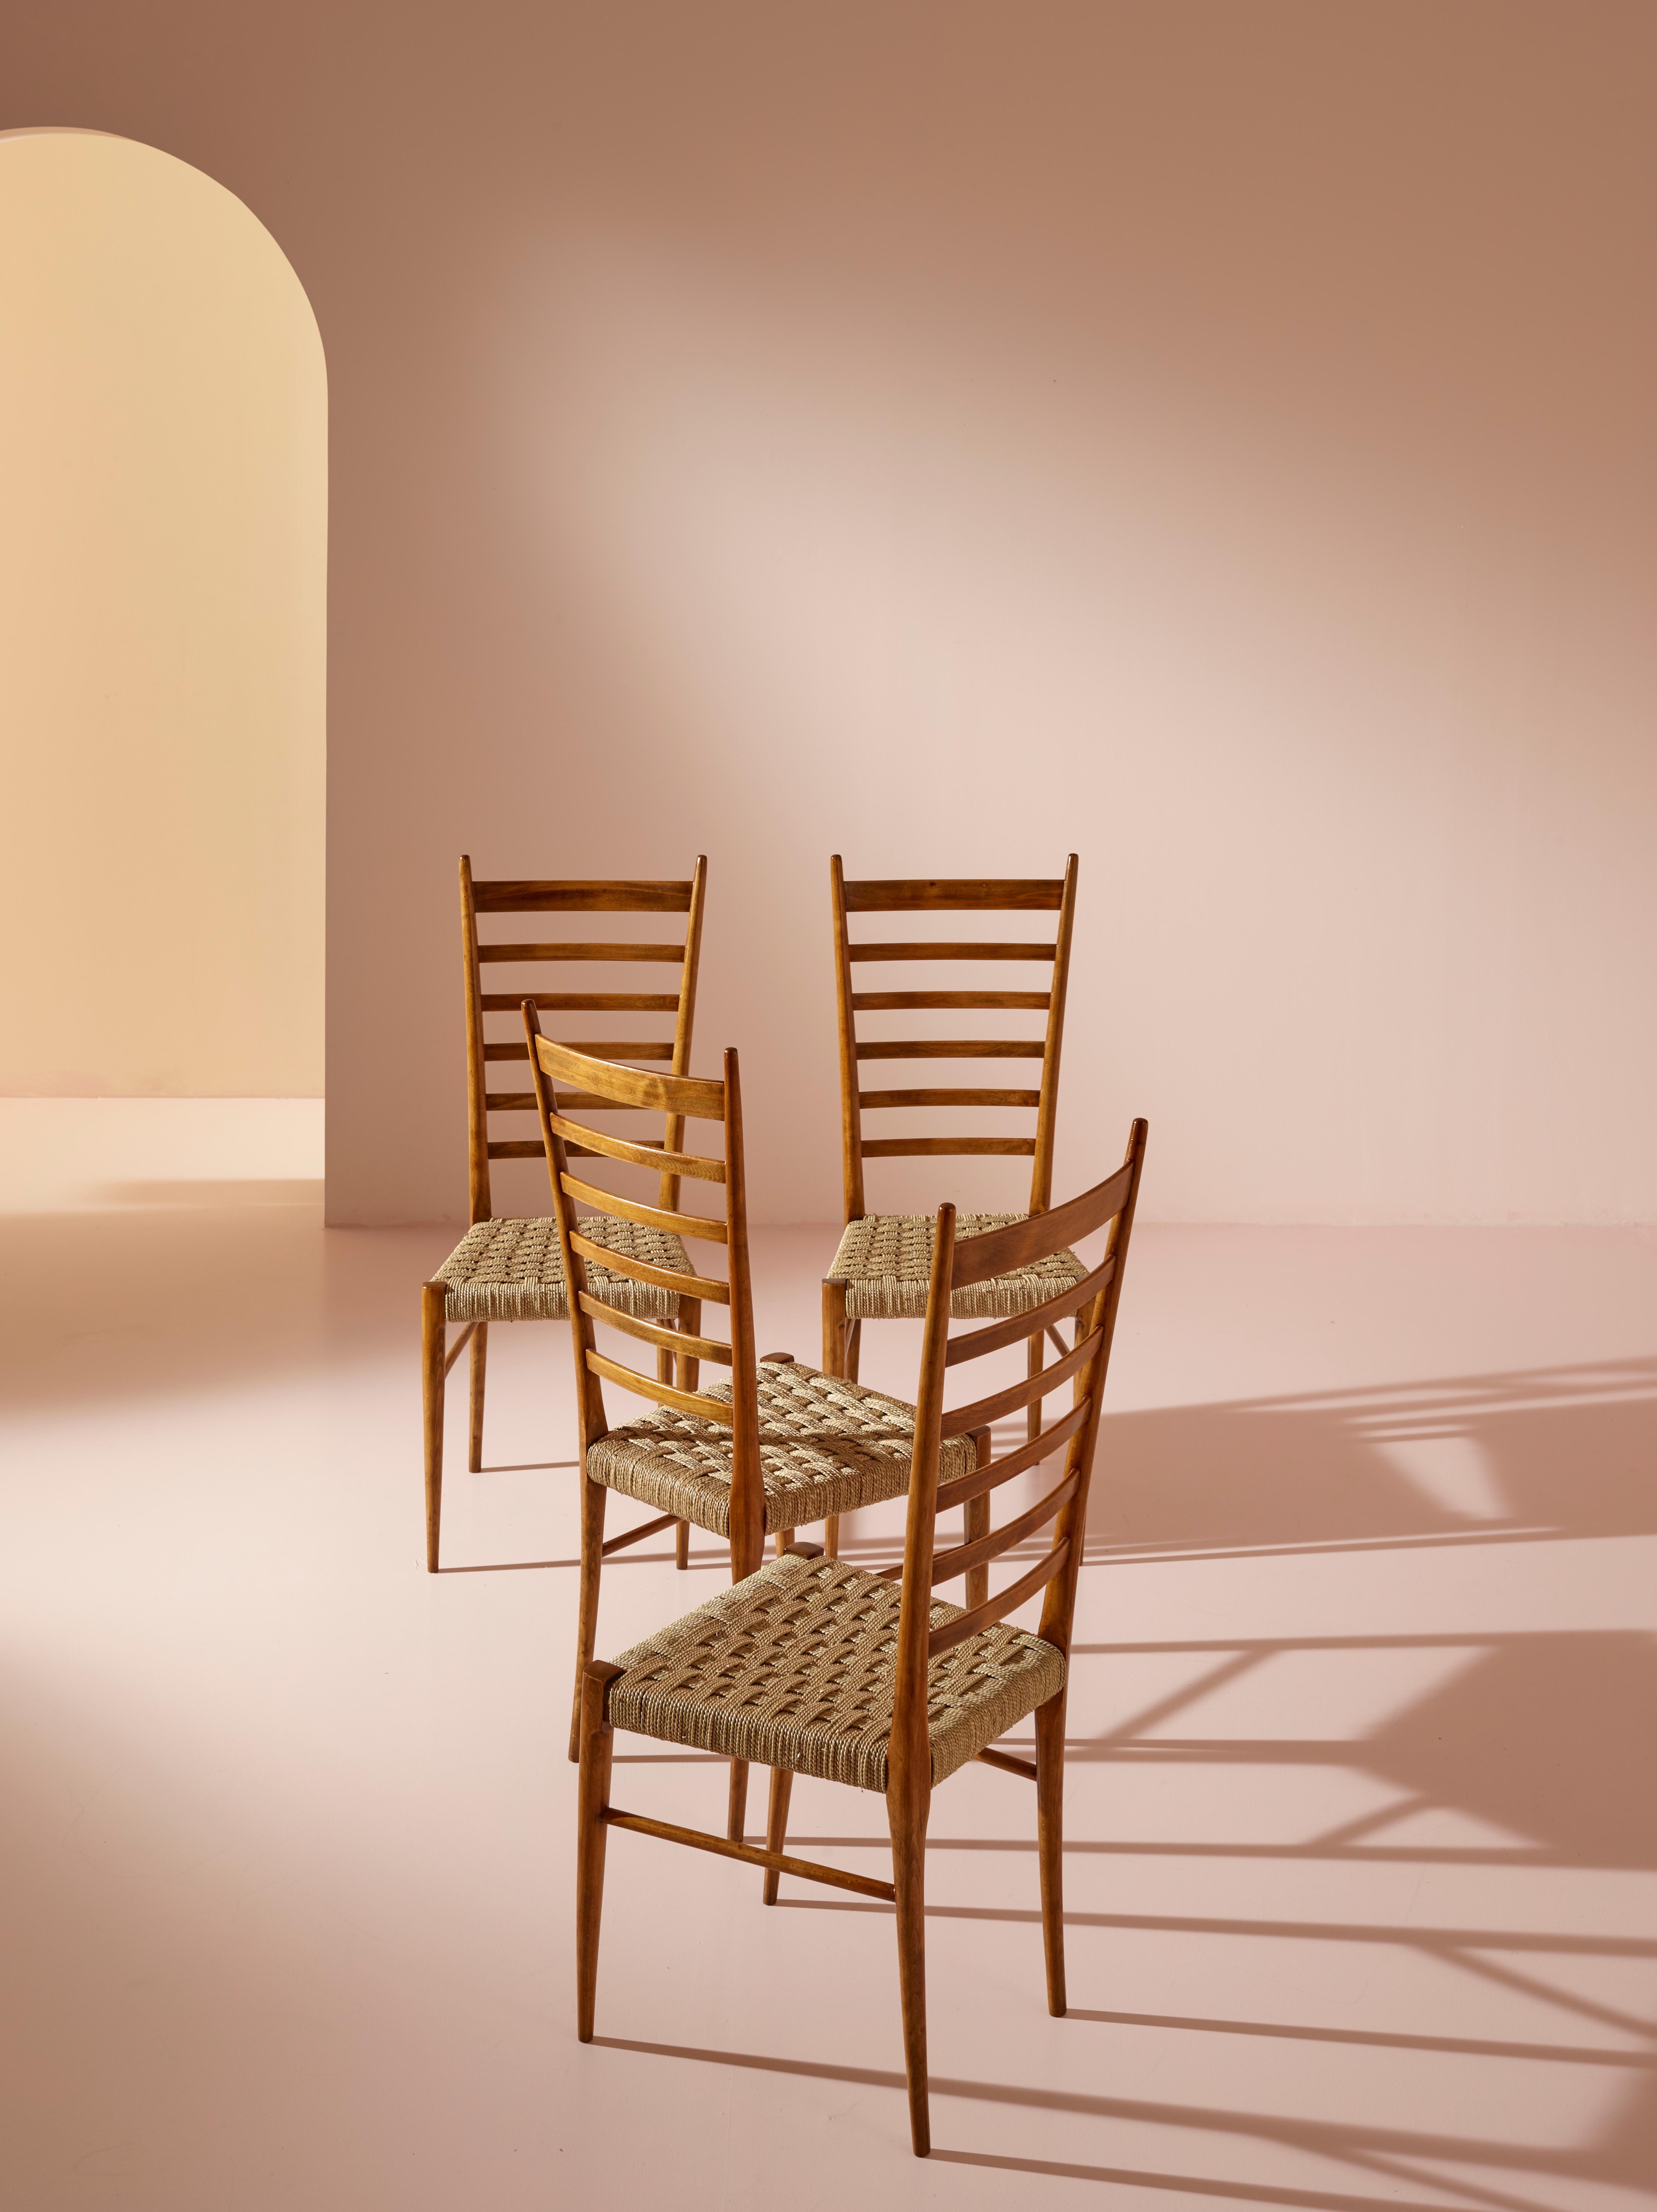 Colombo Sanguineti set of two ''Sei Stecche'' chairs, Chiavari, Italy, 1950s For Sale 9